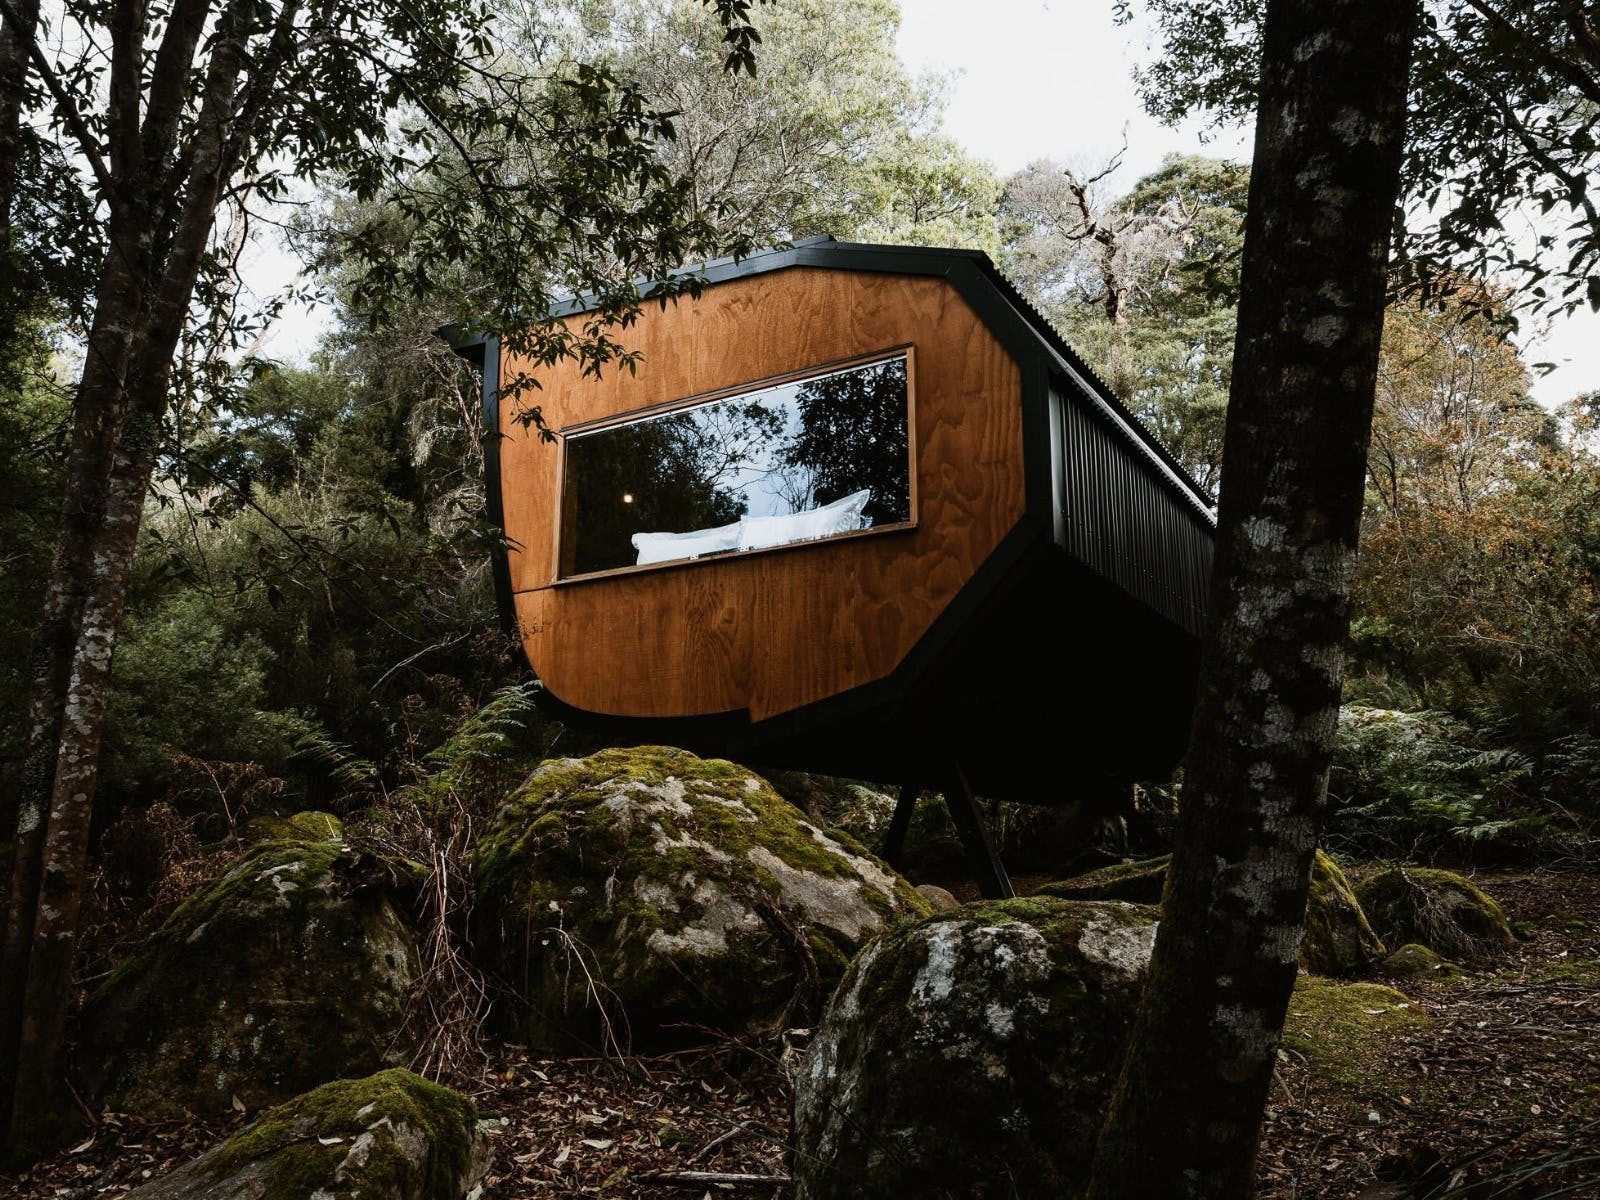 Pods accommodation in the forests of the Blue Derby Mountain Bike Trails